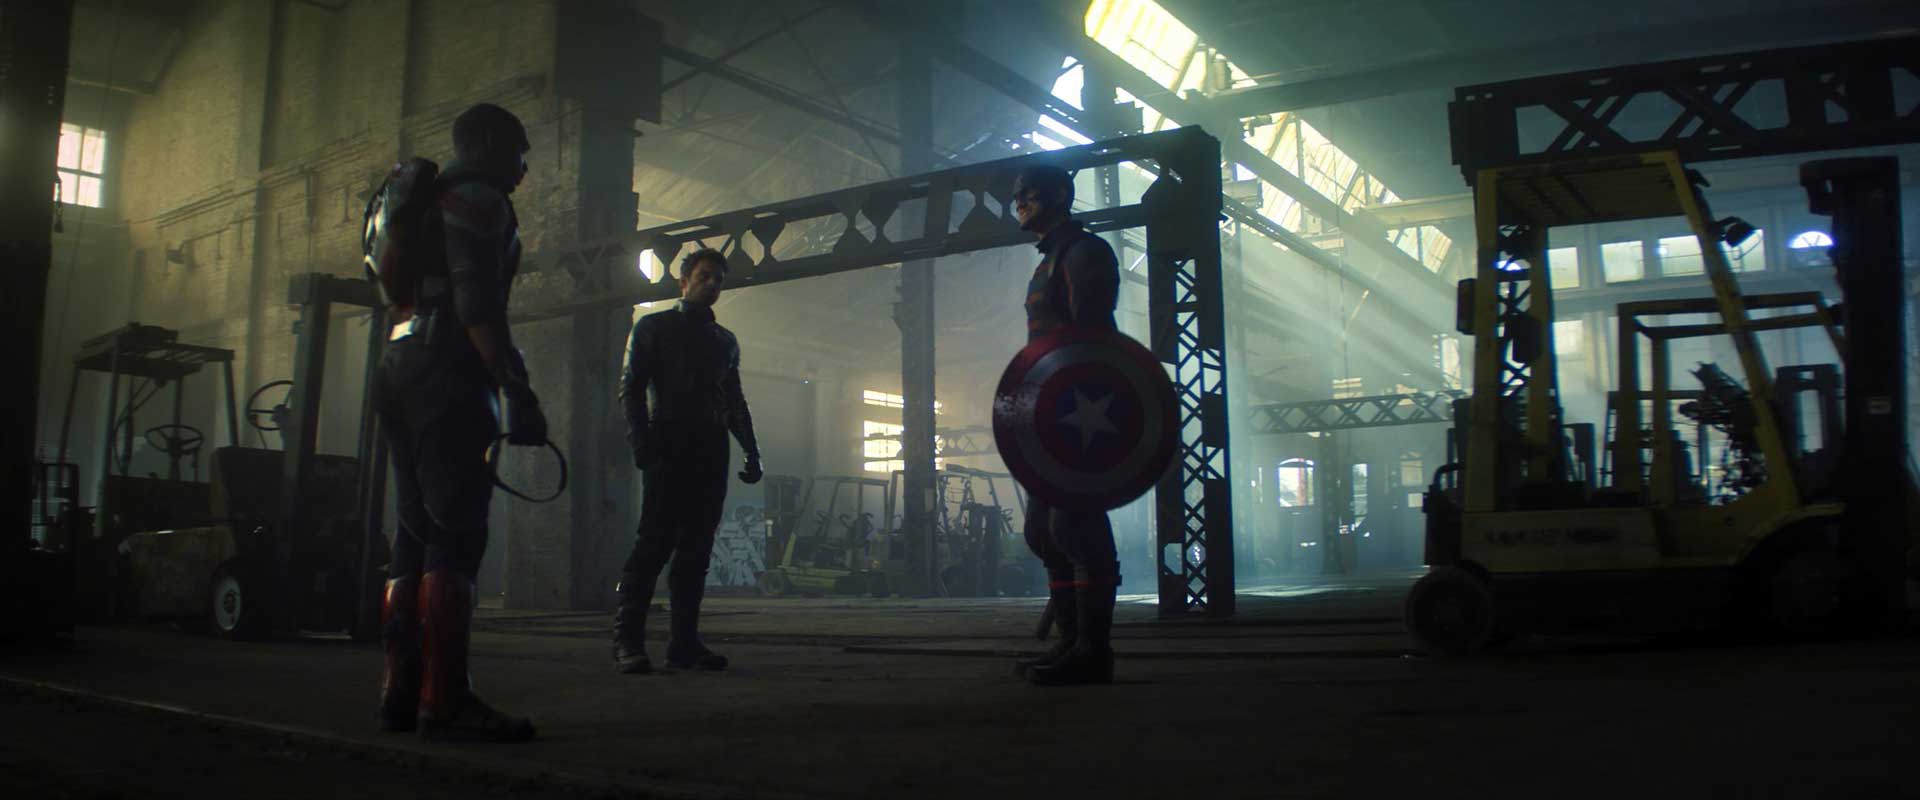 The Falcon and the Winter Soldier Episode 5 Still 1